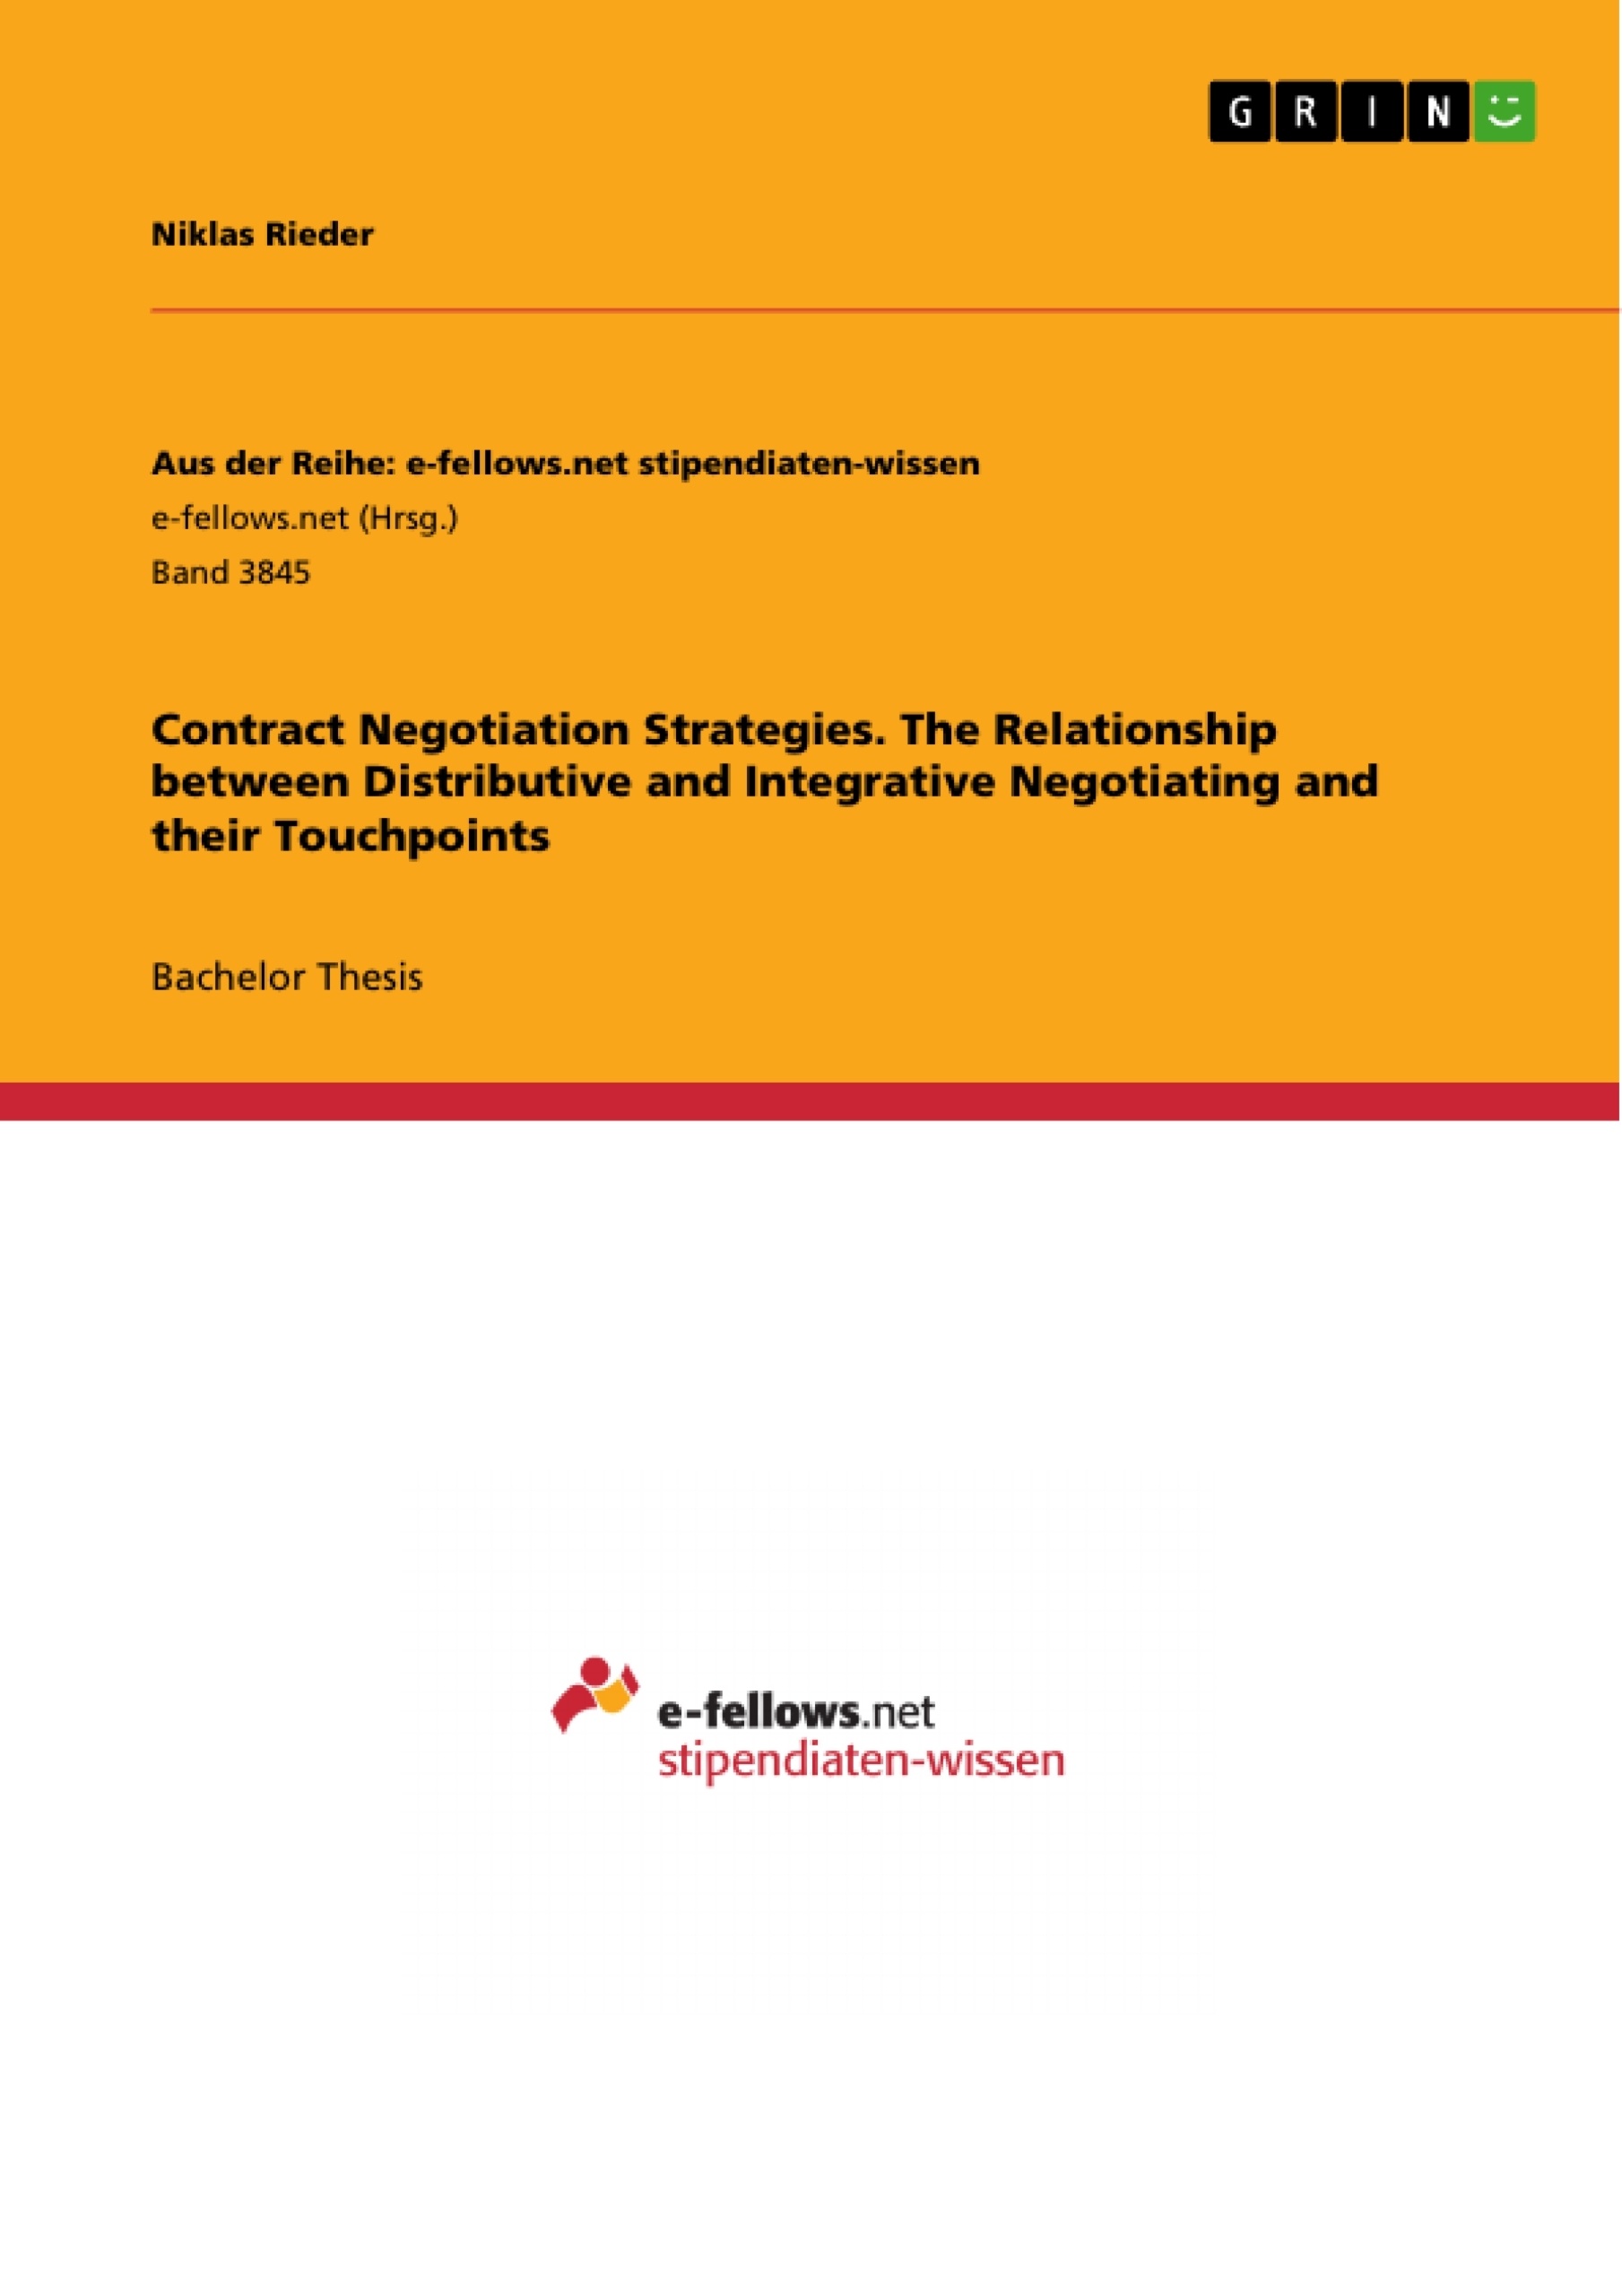 Title: Contract Negotiation Strategies. The Relationship between Distributive 
and Integrative Negotiating and their Touchpoints